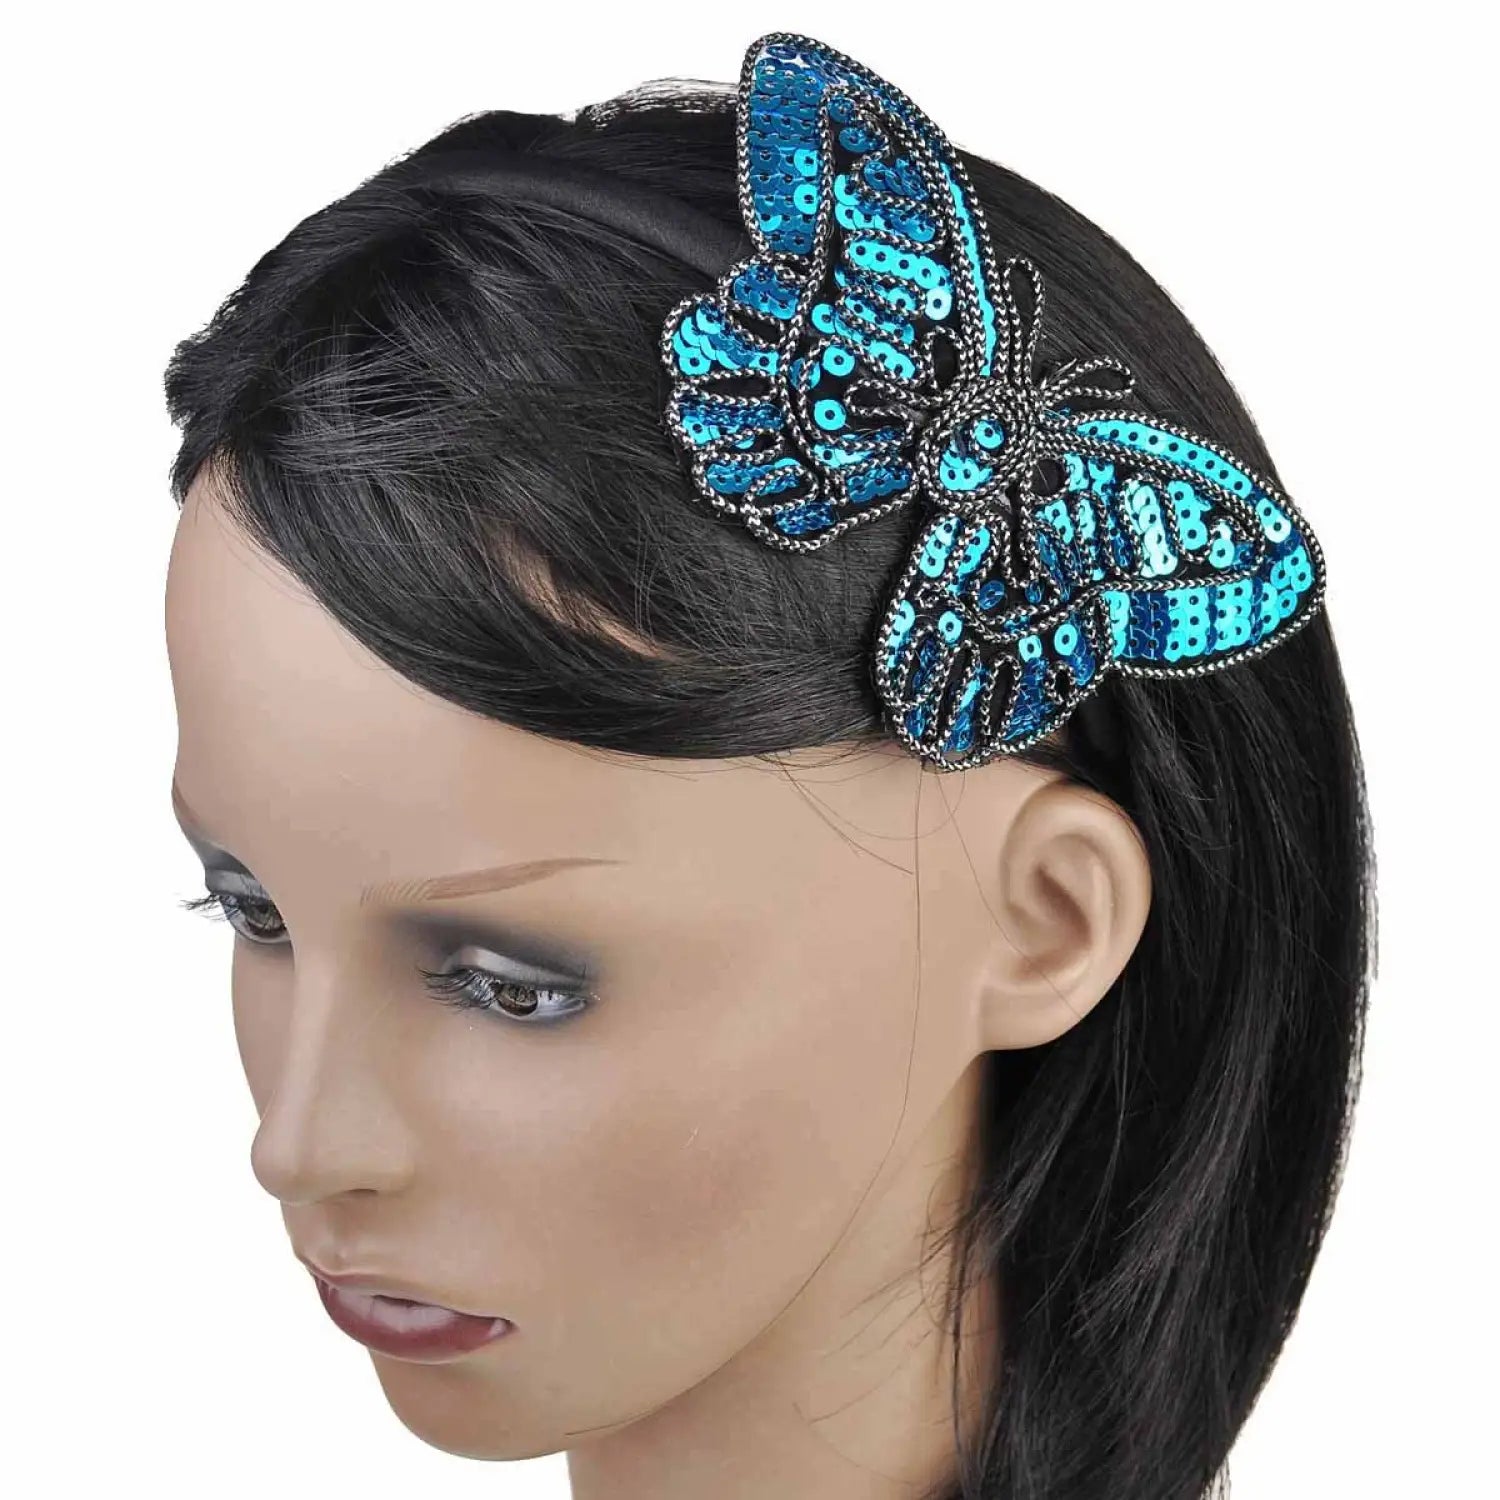 Blue butterfly hair clip on Sparkling Butterfly Alice Headband with Sequins & Spangles.